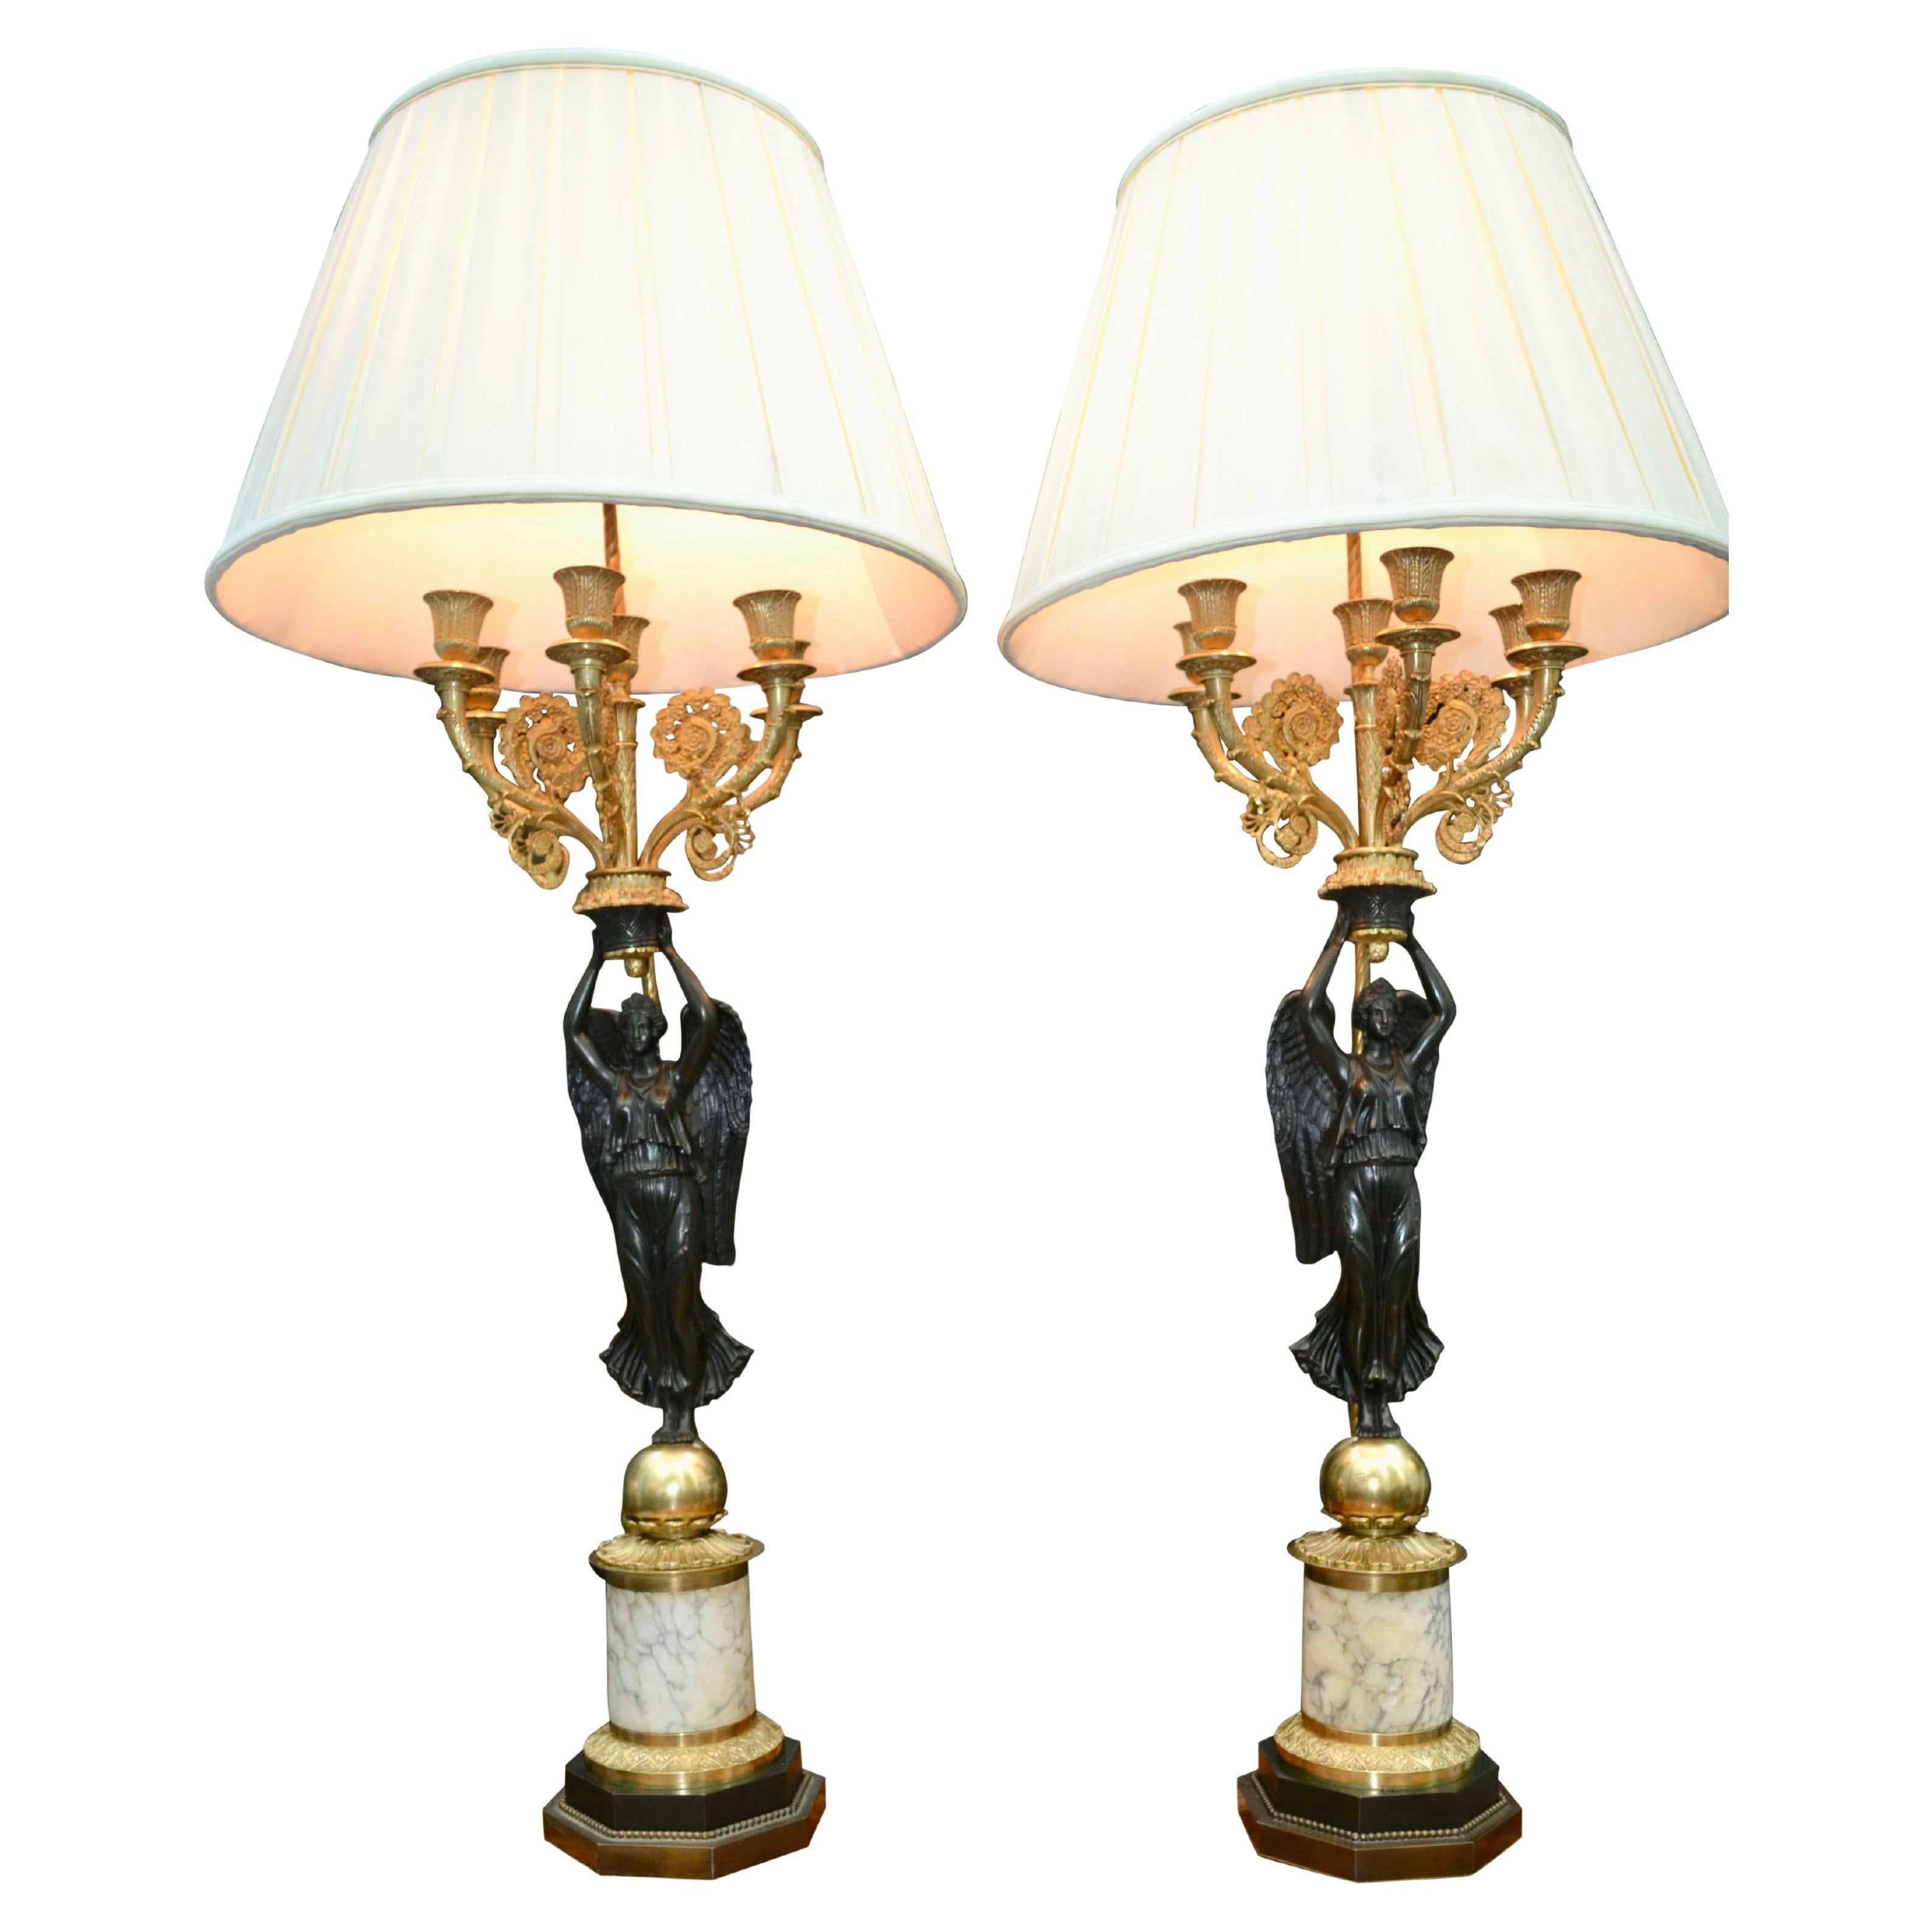 A Pair of French Empire Style Patinated and Gilt Bronze Winged Victory Lamps For Sale